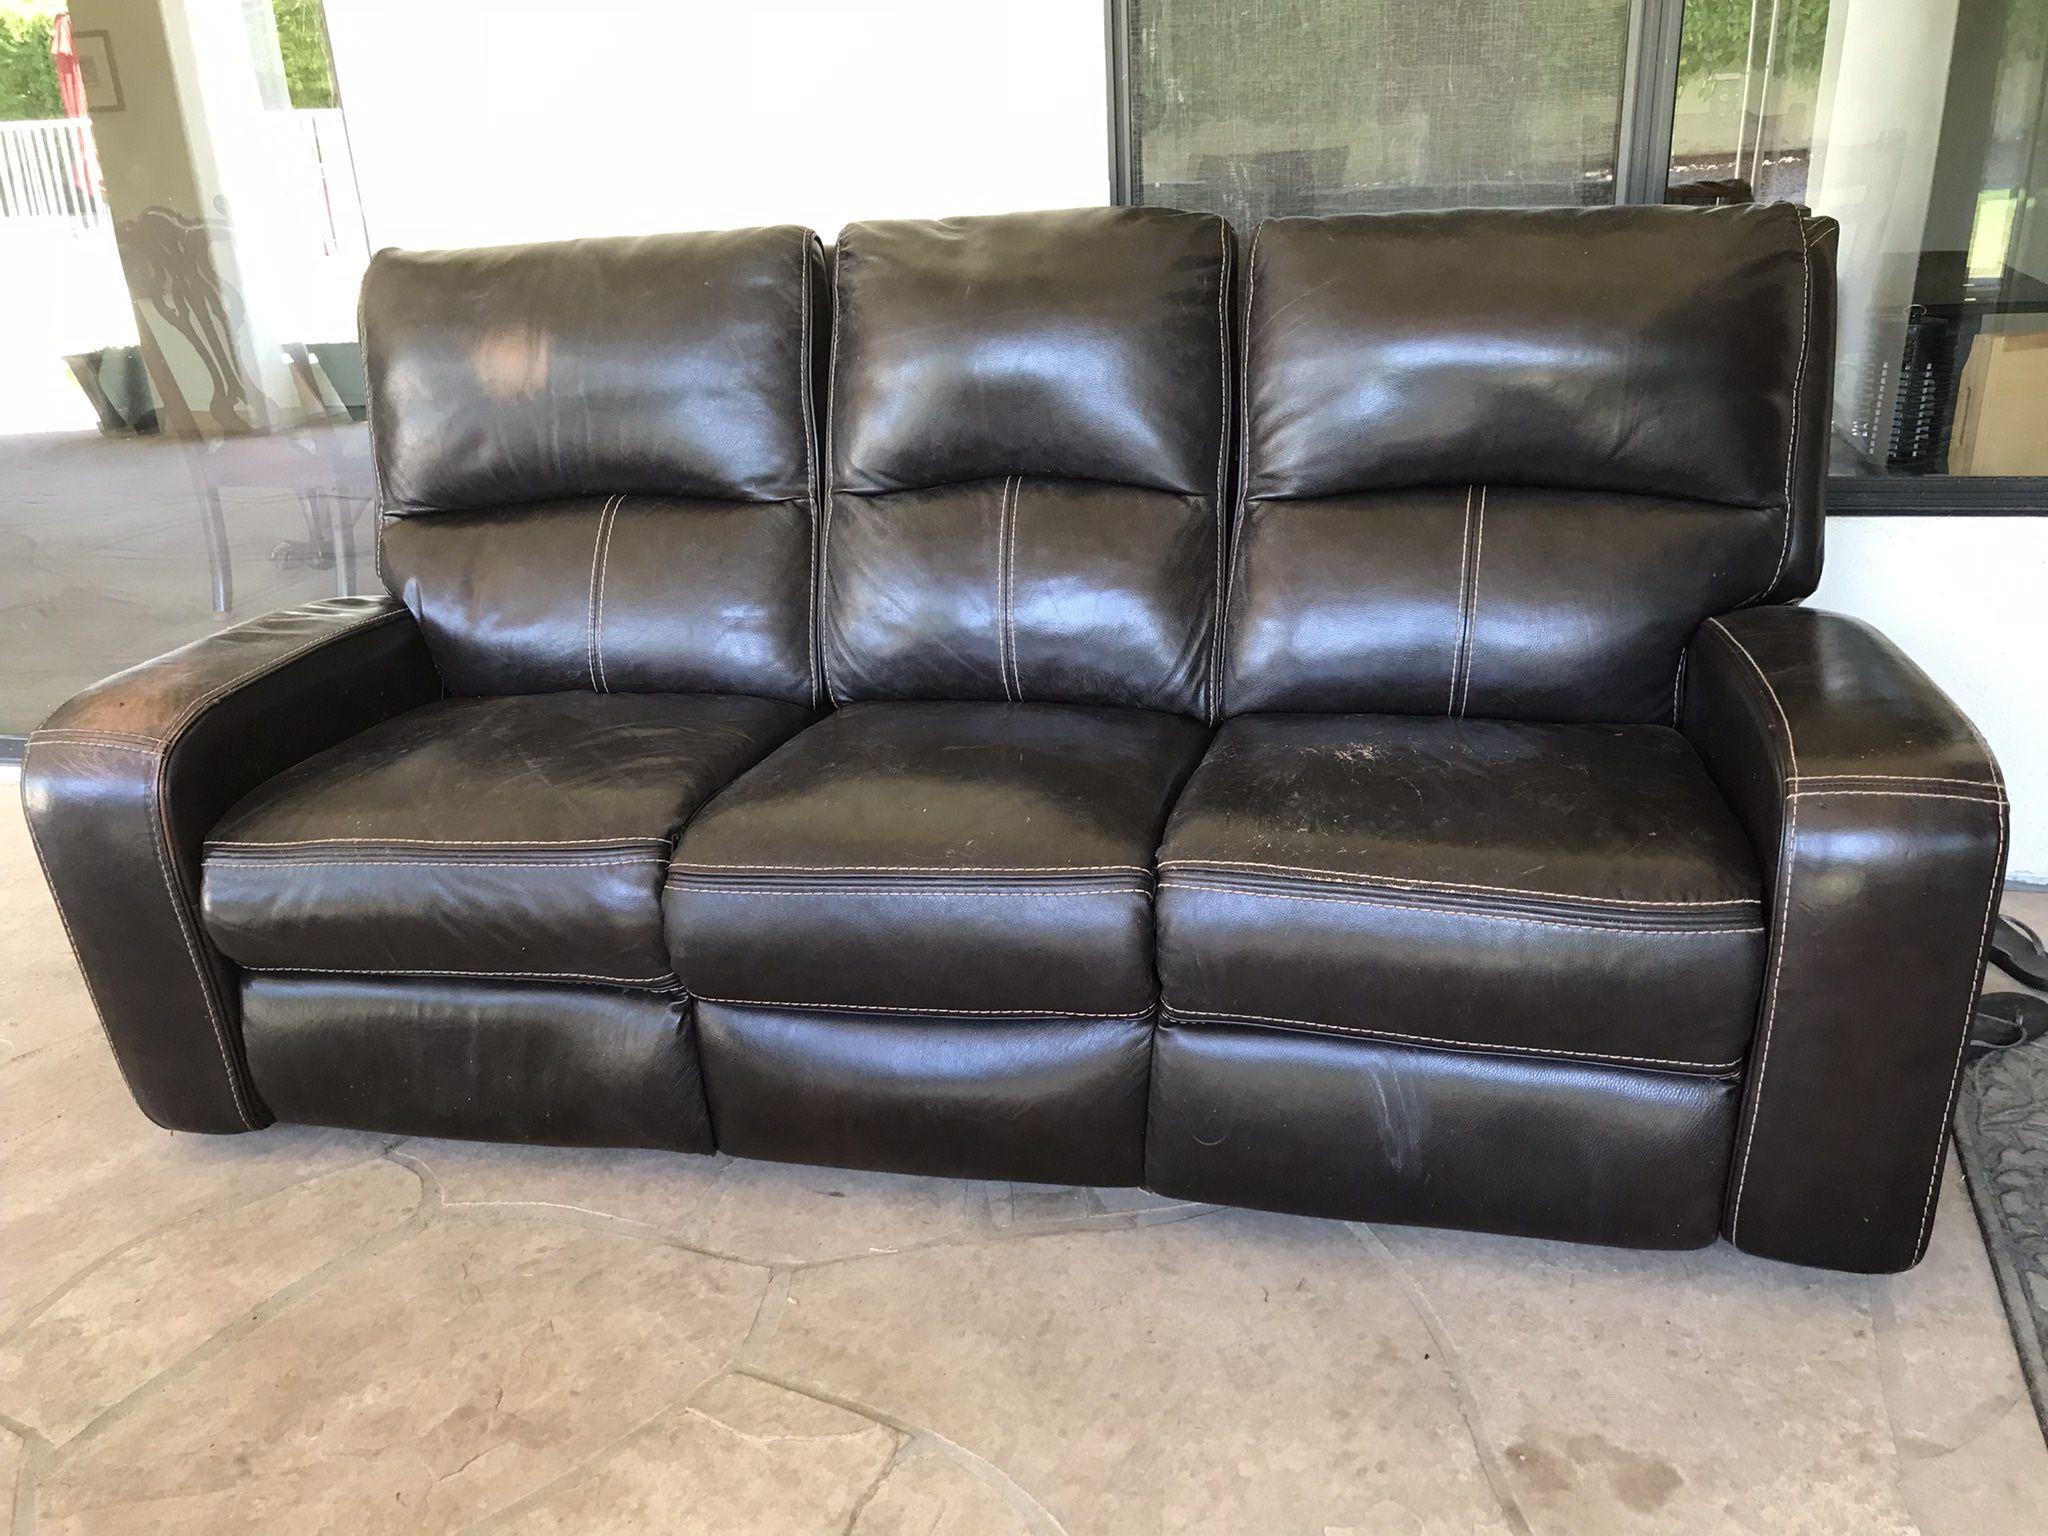 3 Seat Couch With Two Of The Seats Being Recliners